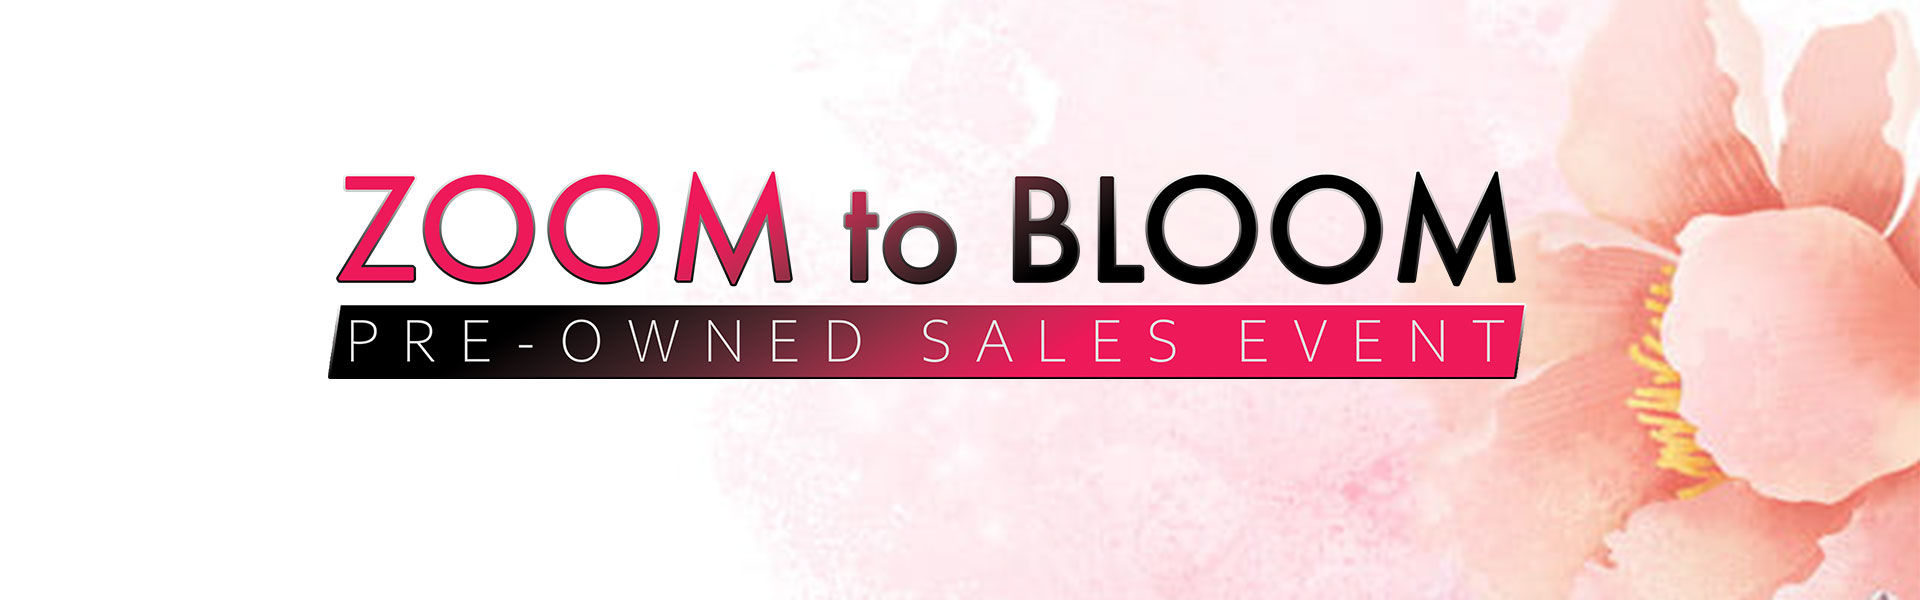 Zoom to Bloom Pre-owned sales event